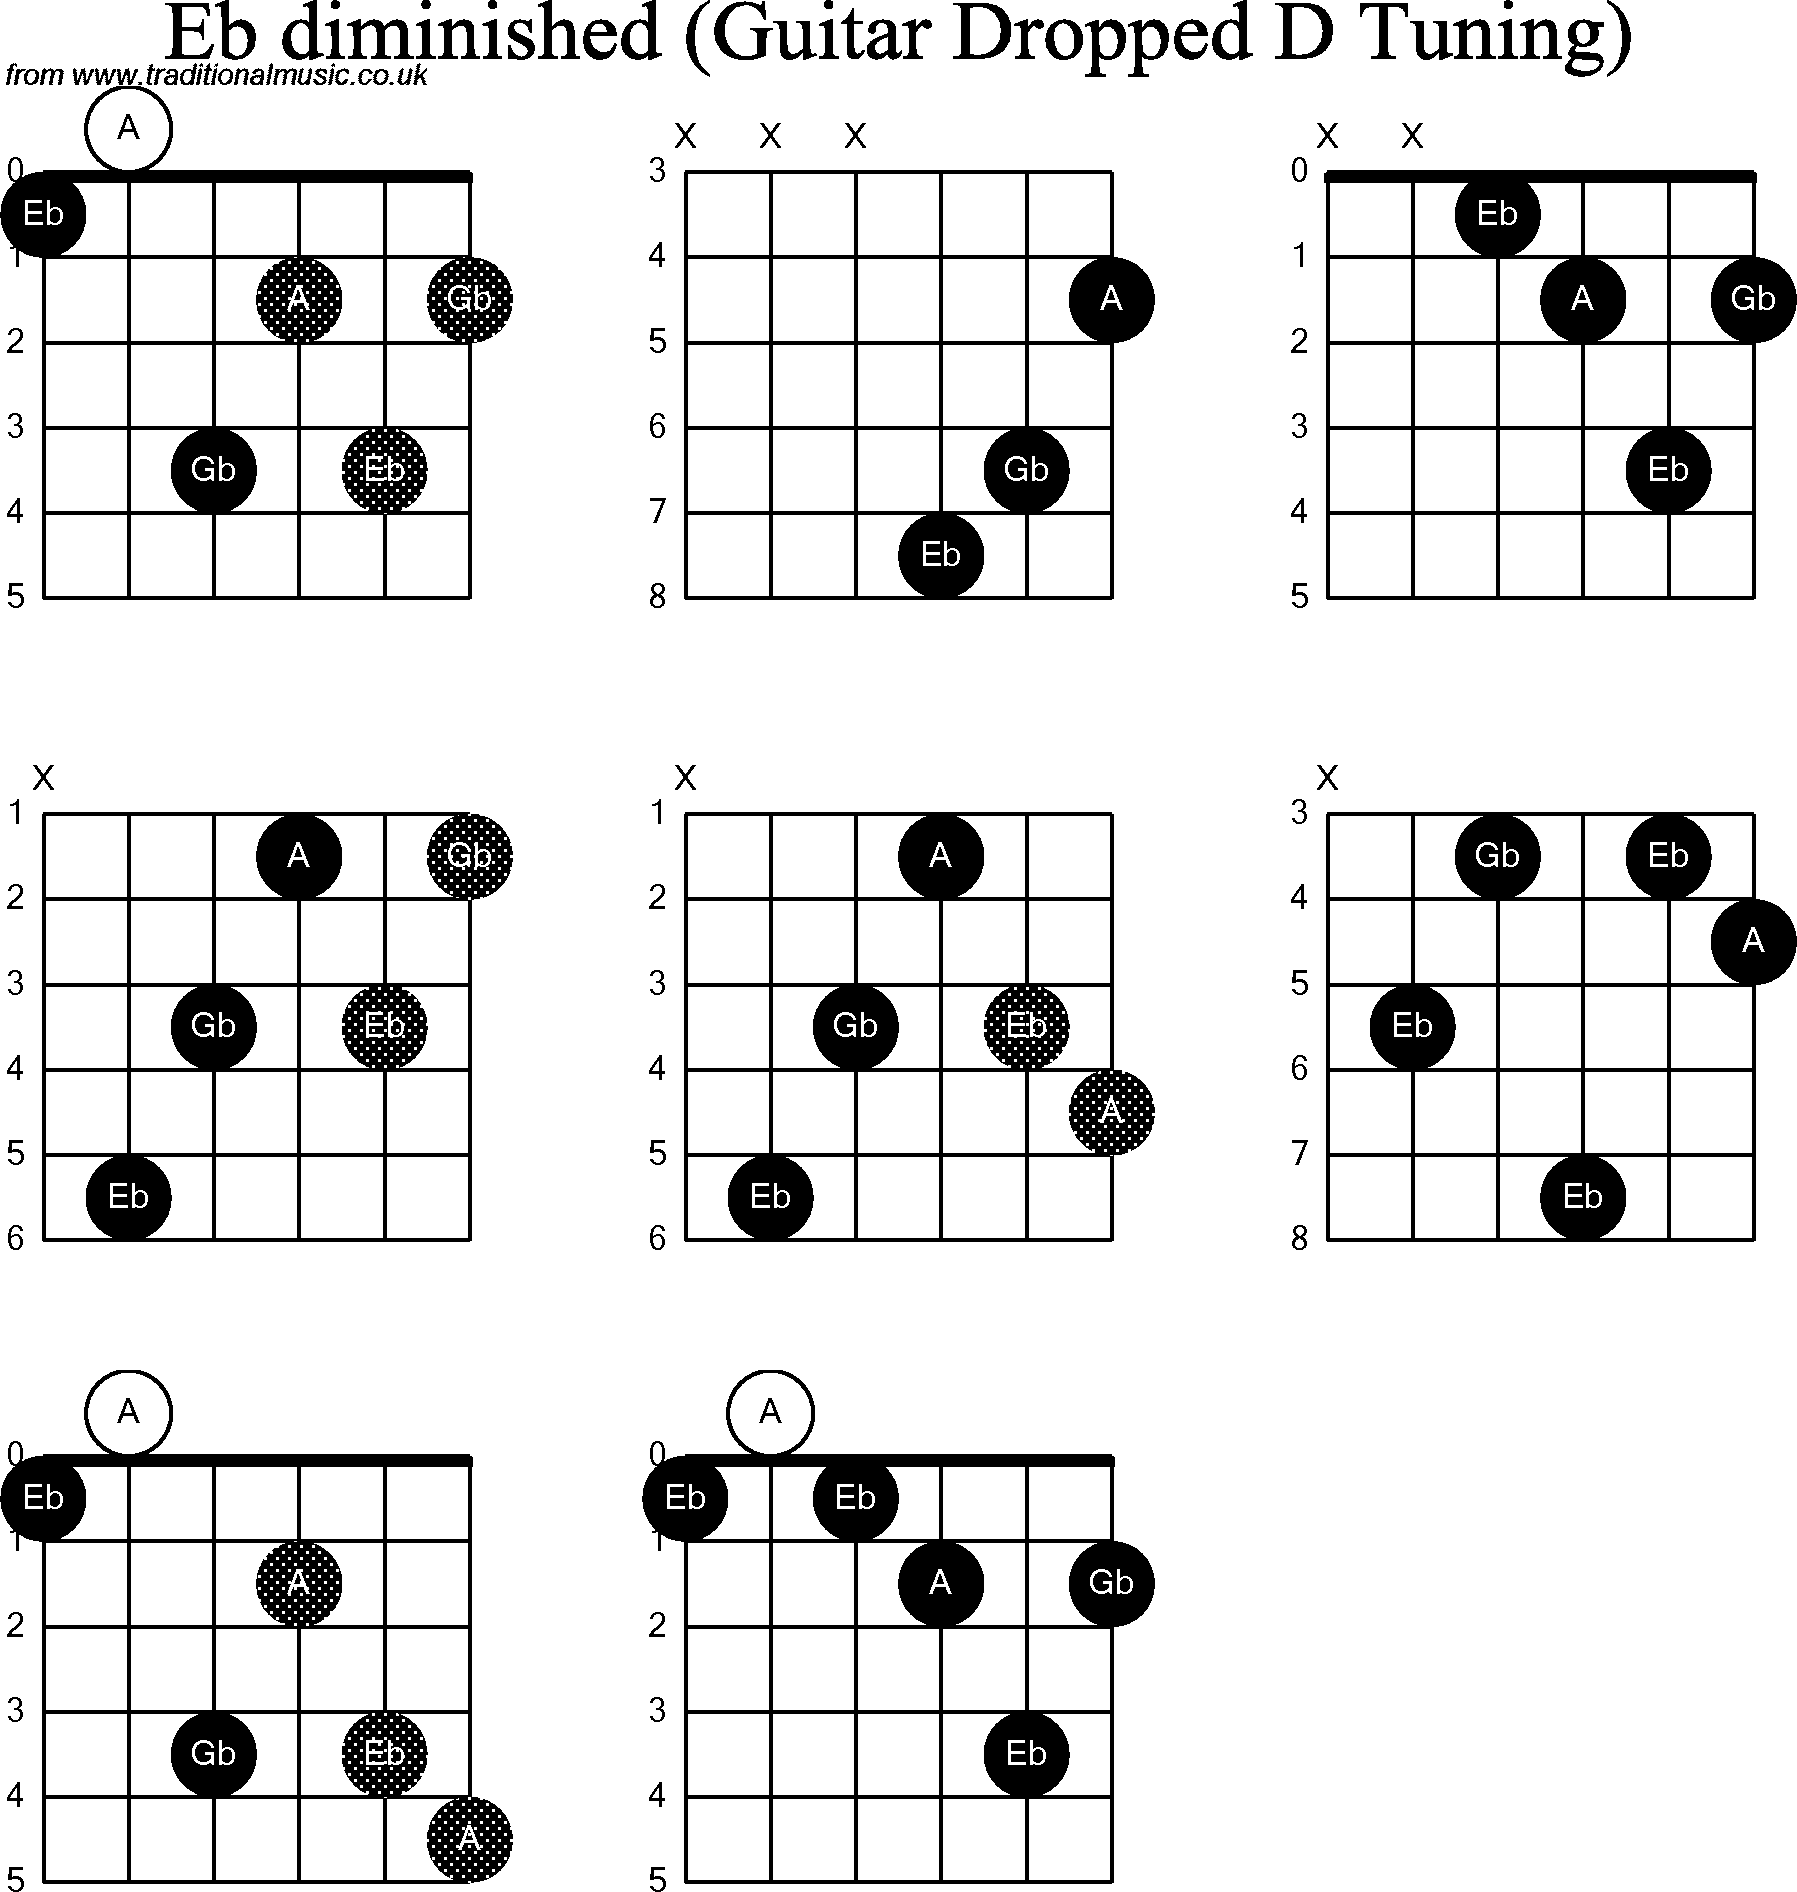 Chord diagrams for dropped D Guitar(DADGBE), Eb Diminished